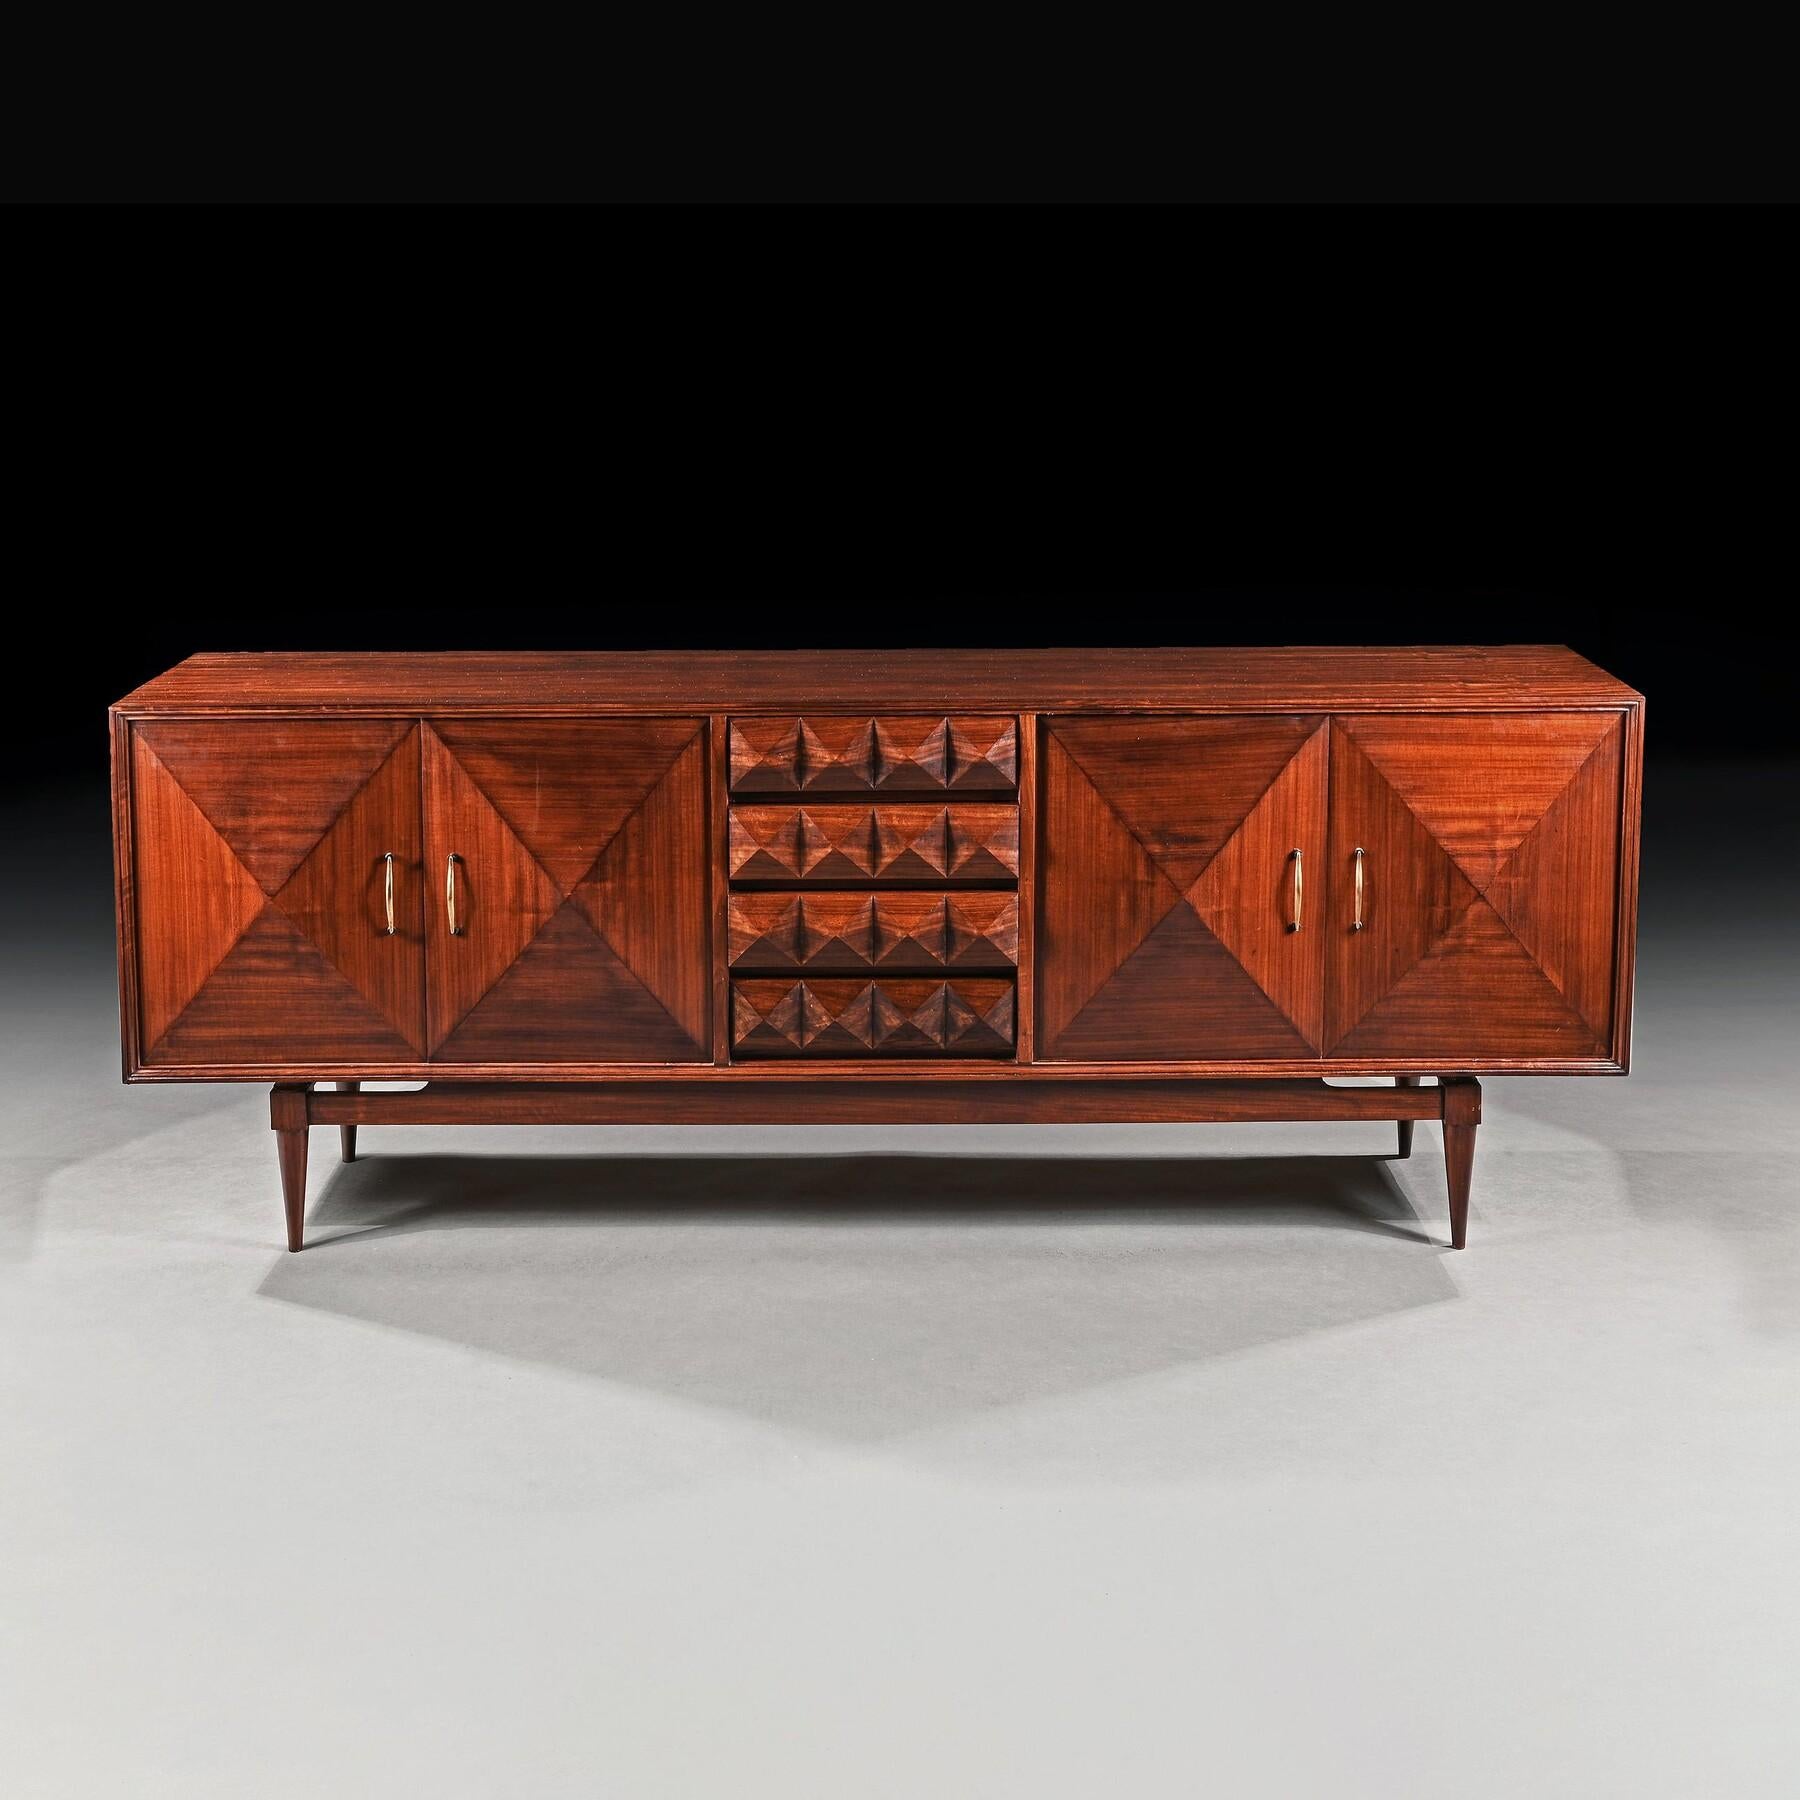 An Unusual and Rare Mid 20th Century Walnut Sideboard / Enfilade with pyramid doors and drawers. 
 
Probably USA - Circa 1960

Of rectangular form with four deep pyramid styled doors flanking four central solid walnut pyramid panel decorated